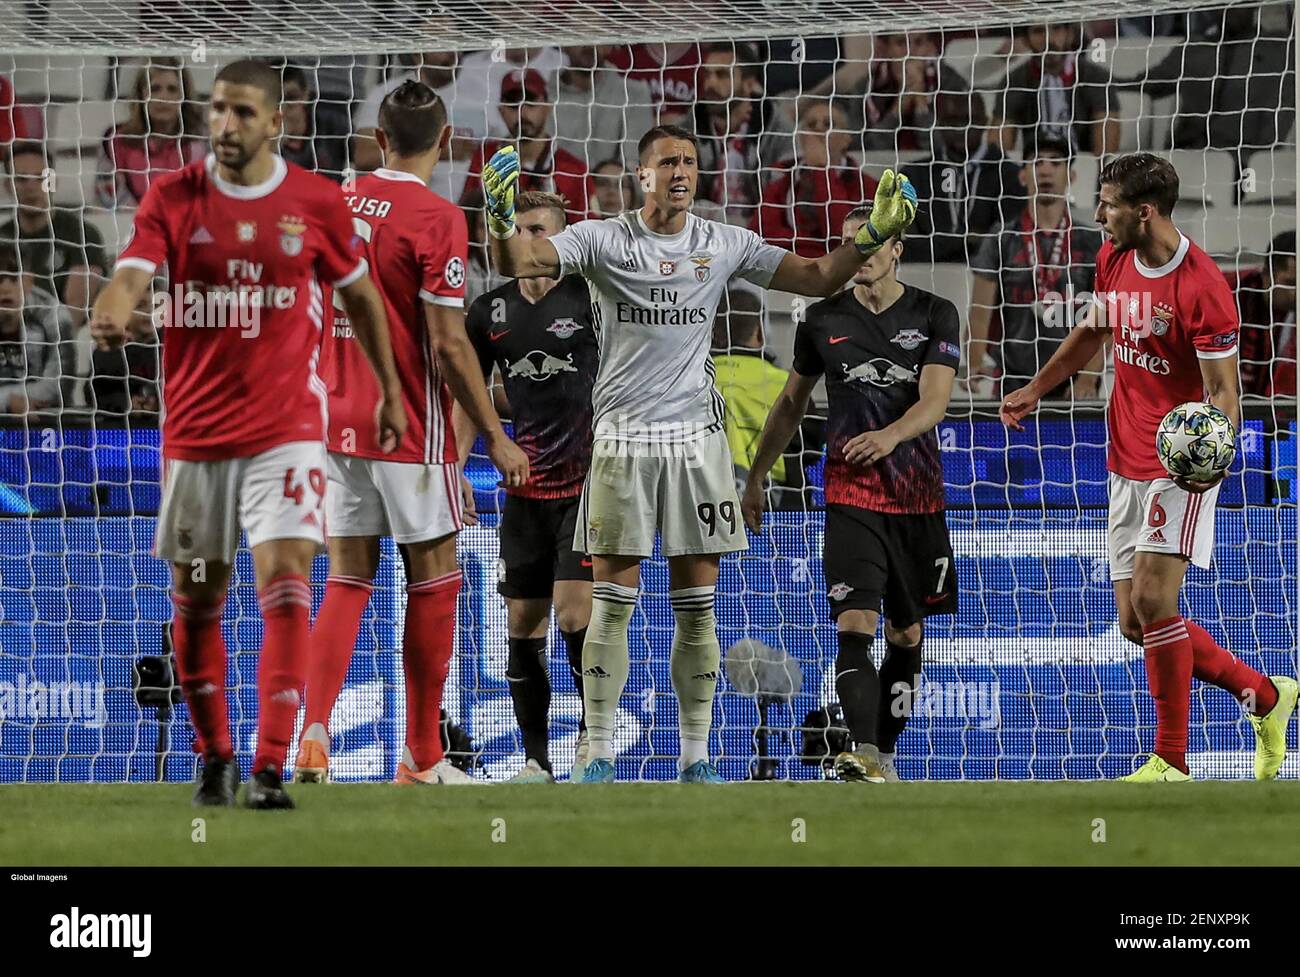 Lisbon, 09/17/2019 - Sport Lisboa e Benfica hosted Rasen Ballsport Leipzig tonight at the Luz Stadium in Lisbon, in a match counting for the first round of the 2019/20 Champions League group stage. Odysseas (Pedro Rocha / Global Images/Sipa USA) Stock Photo